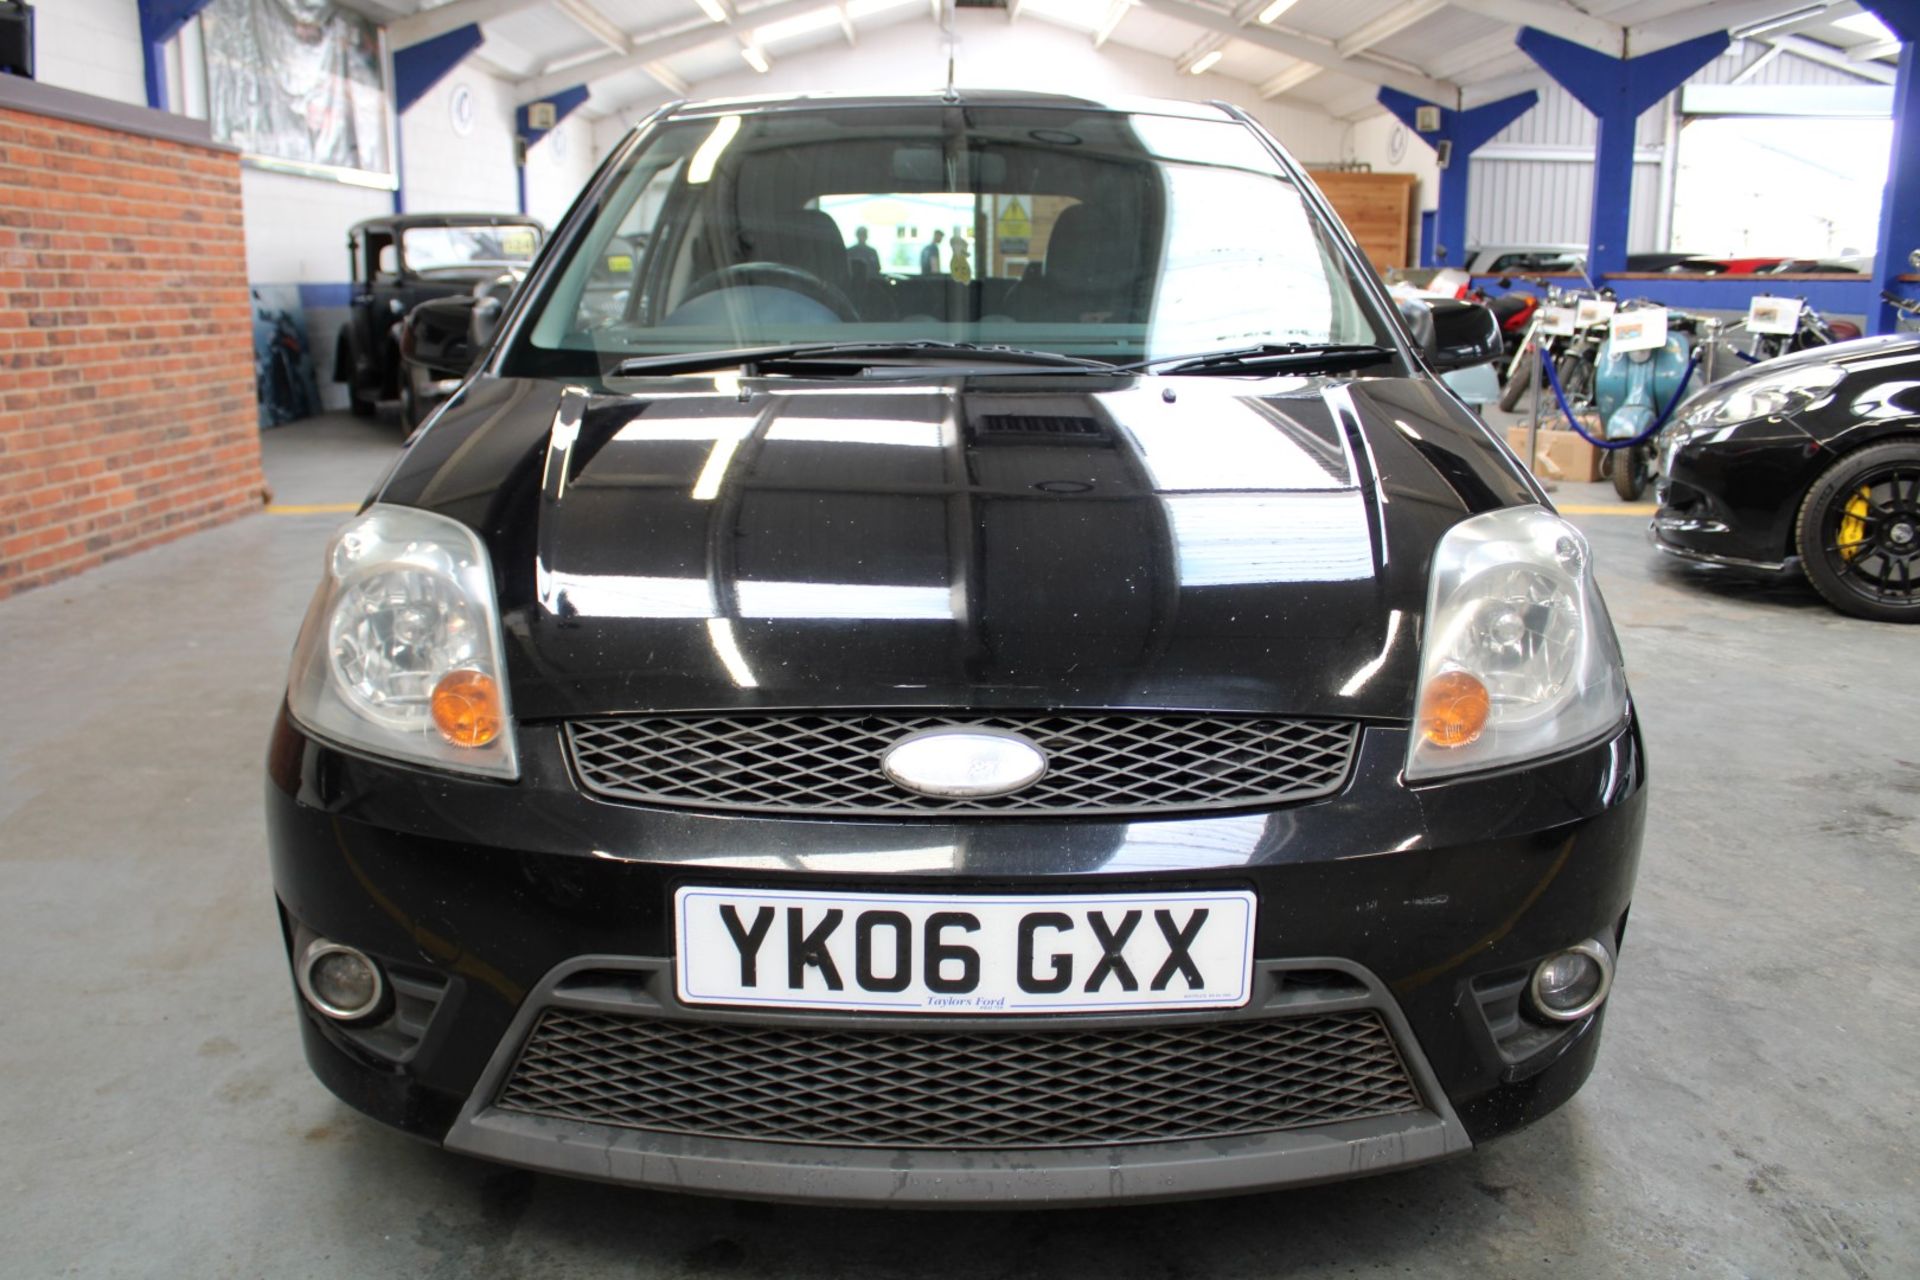 06 06 Ford Fiesta ST - Image 2 of 27